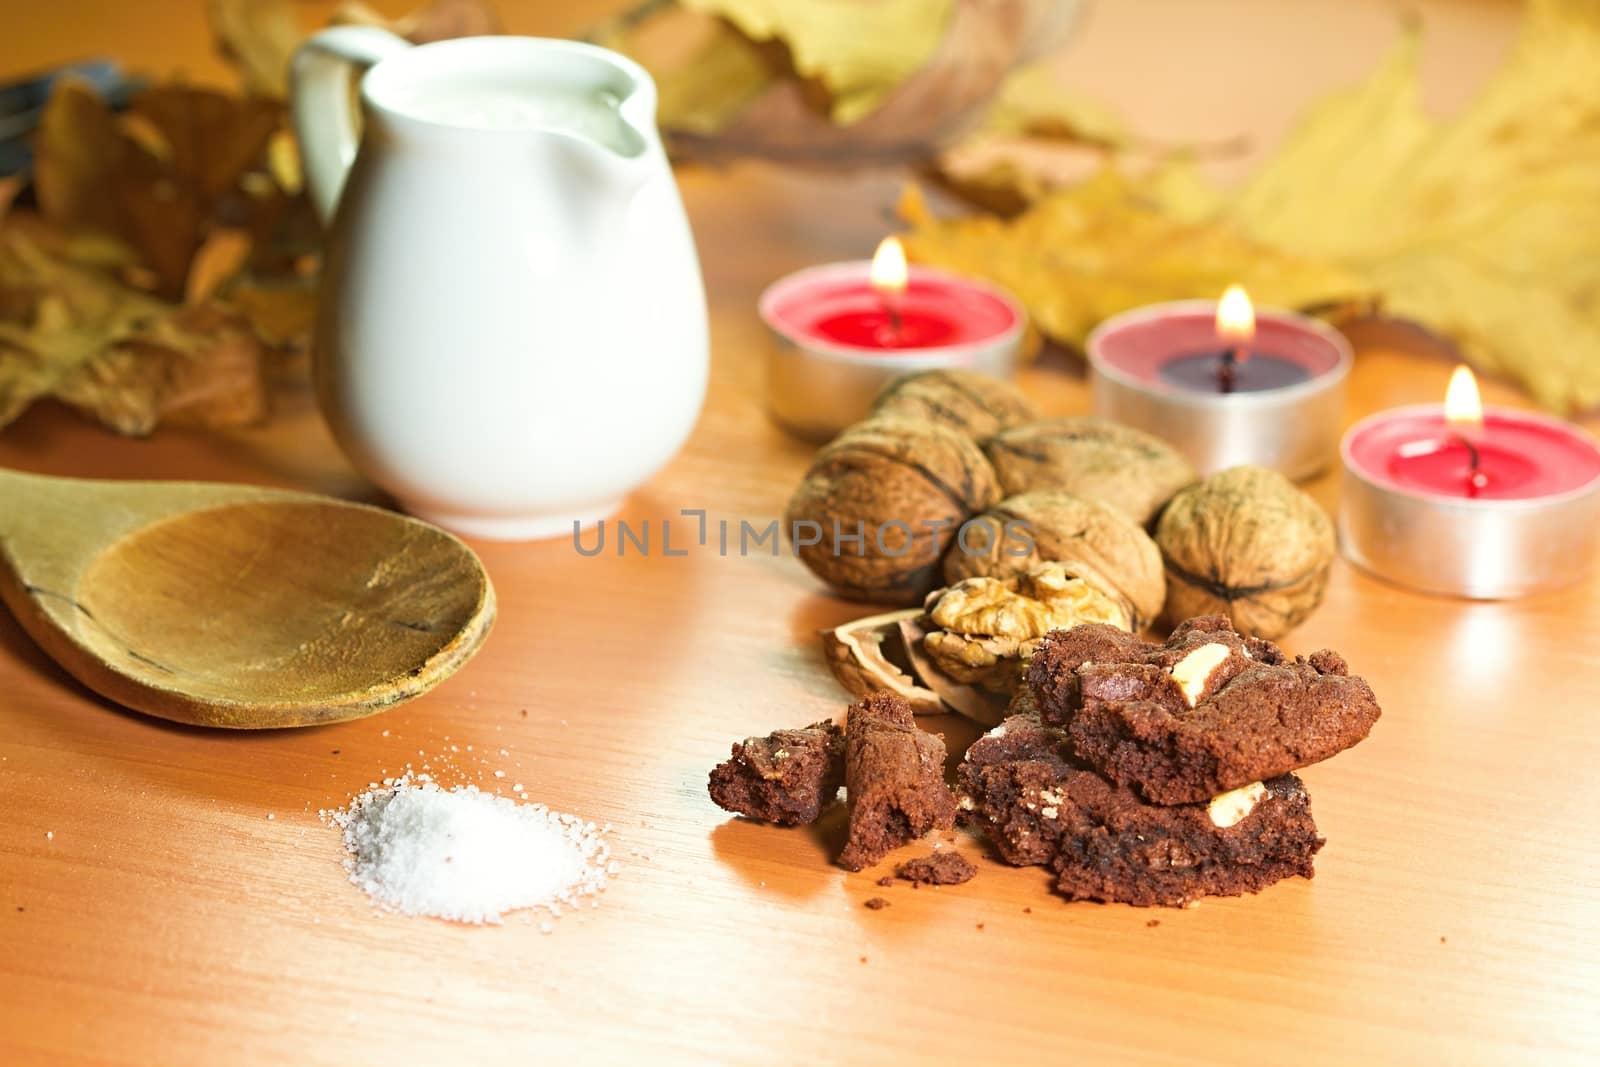 Photo shows a closeup of a various baking ingredients on a table.